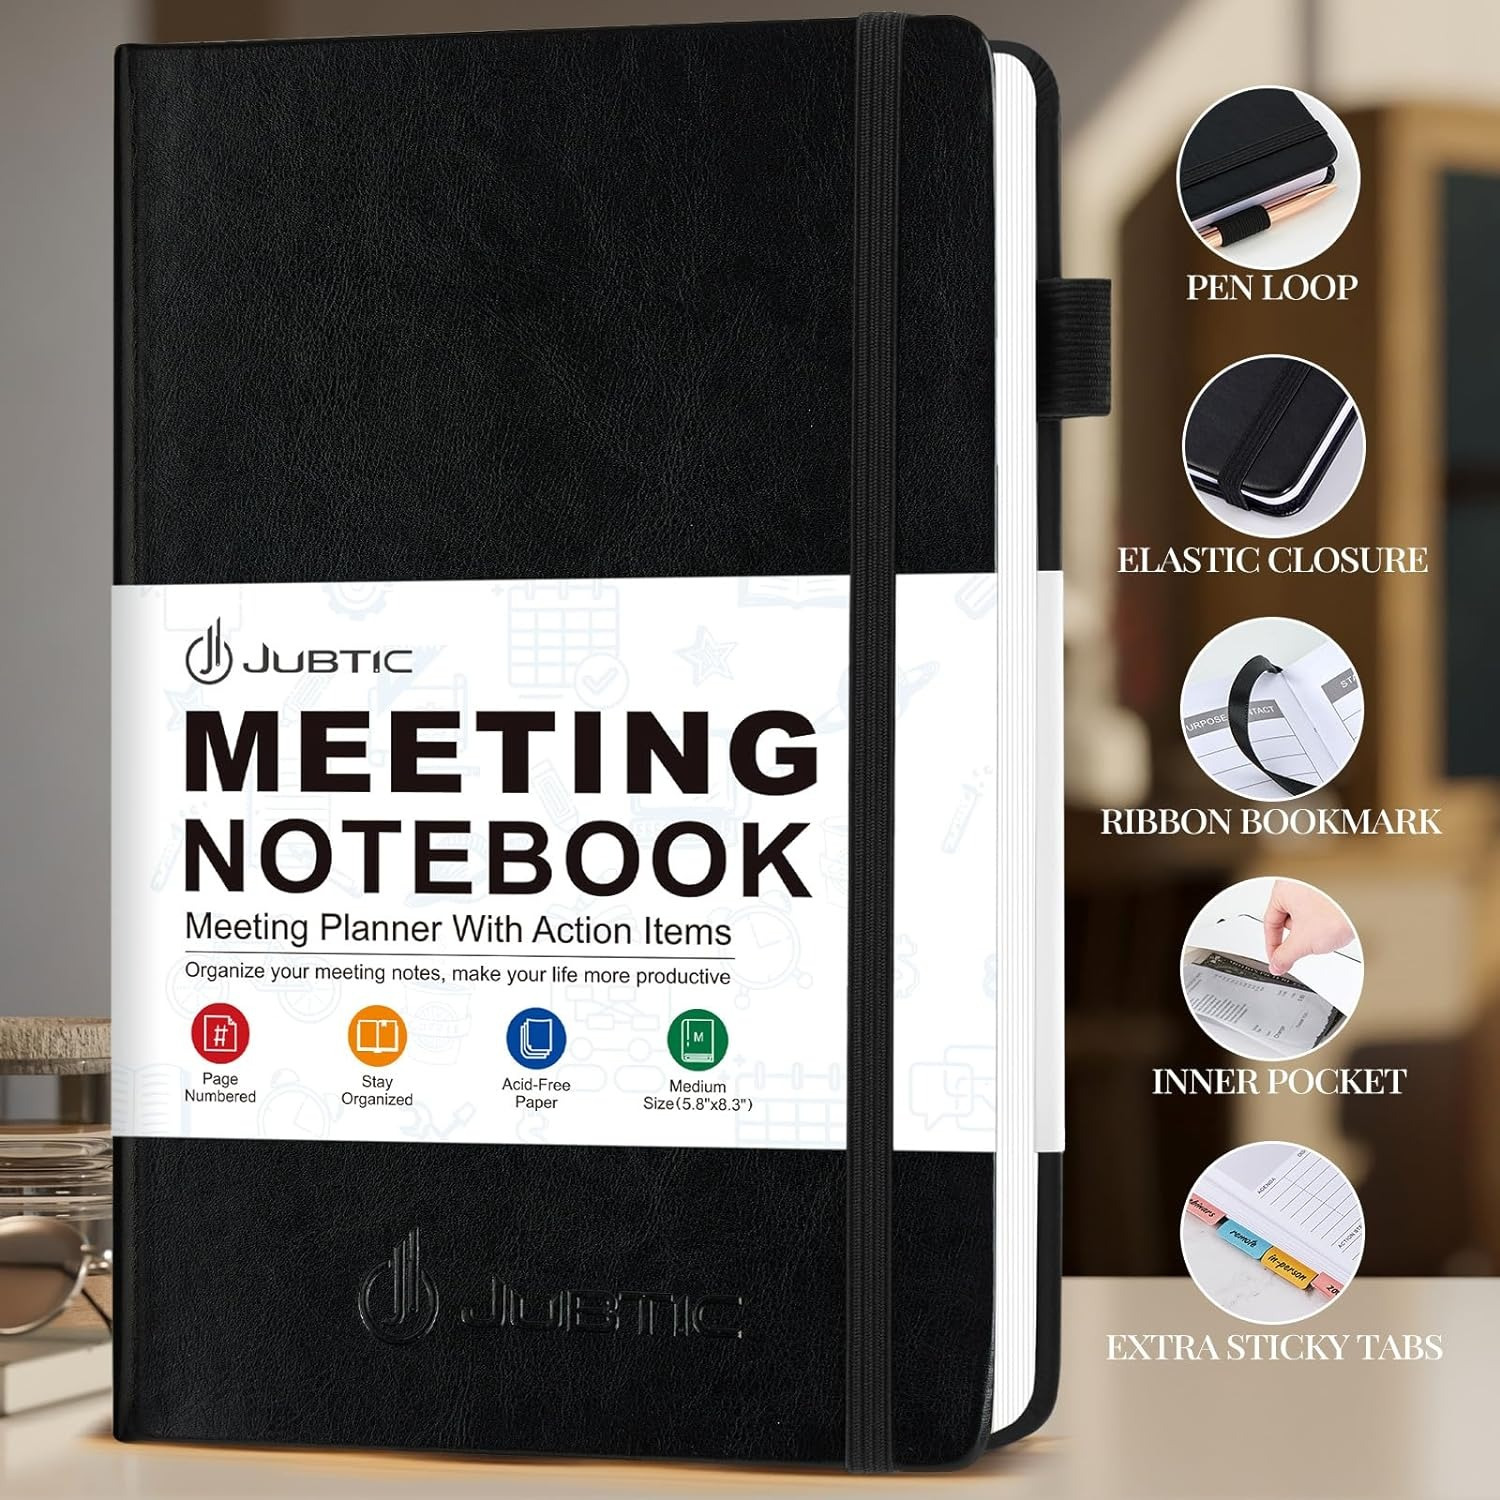 

A5 Executive Notebook - Durable Meeting & Action Planner For Business And Office, Ideal For Men & Women Meeting Notebook For Work Meeting Notes Notebook For Work